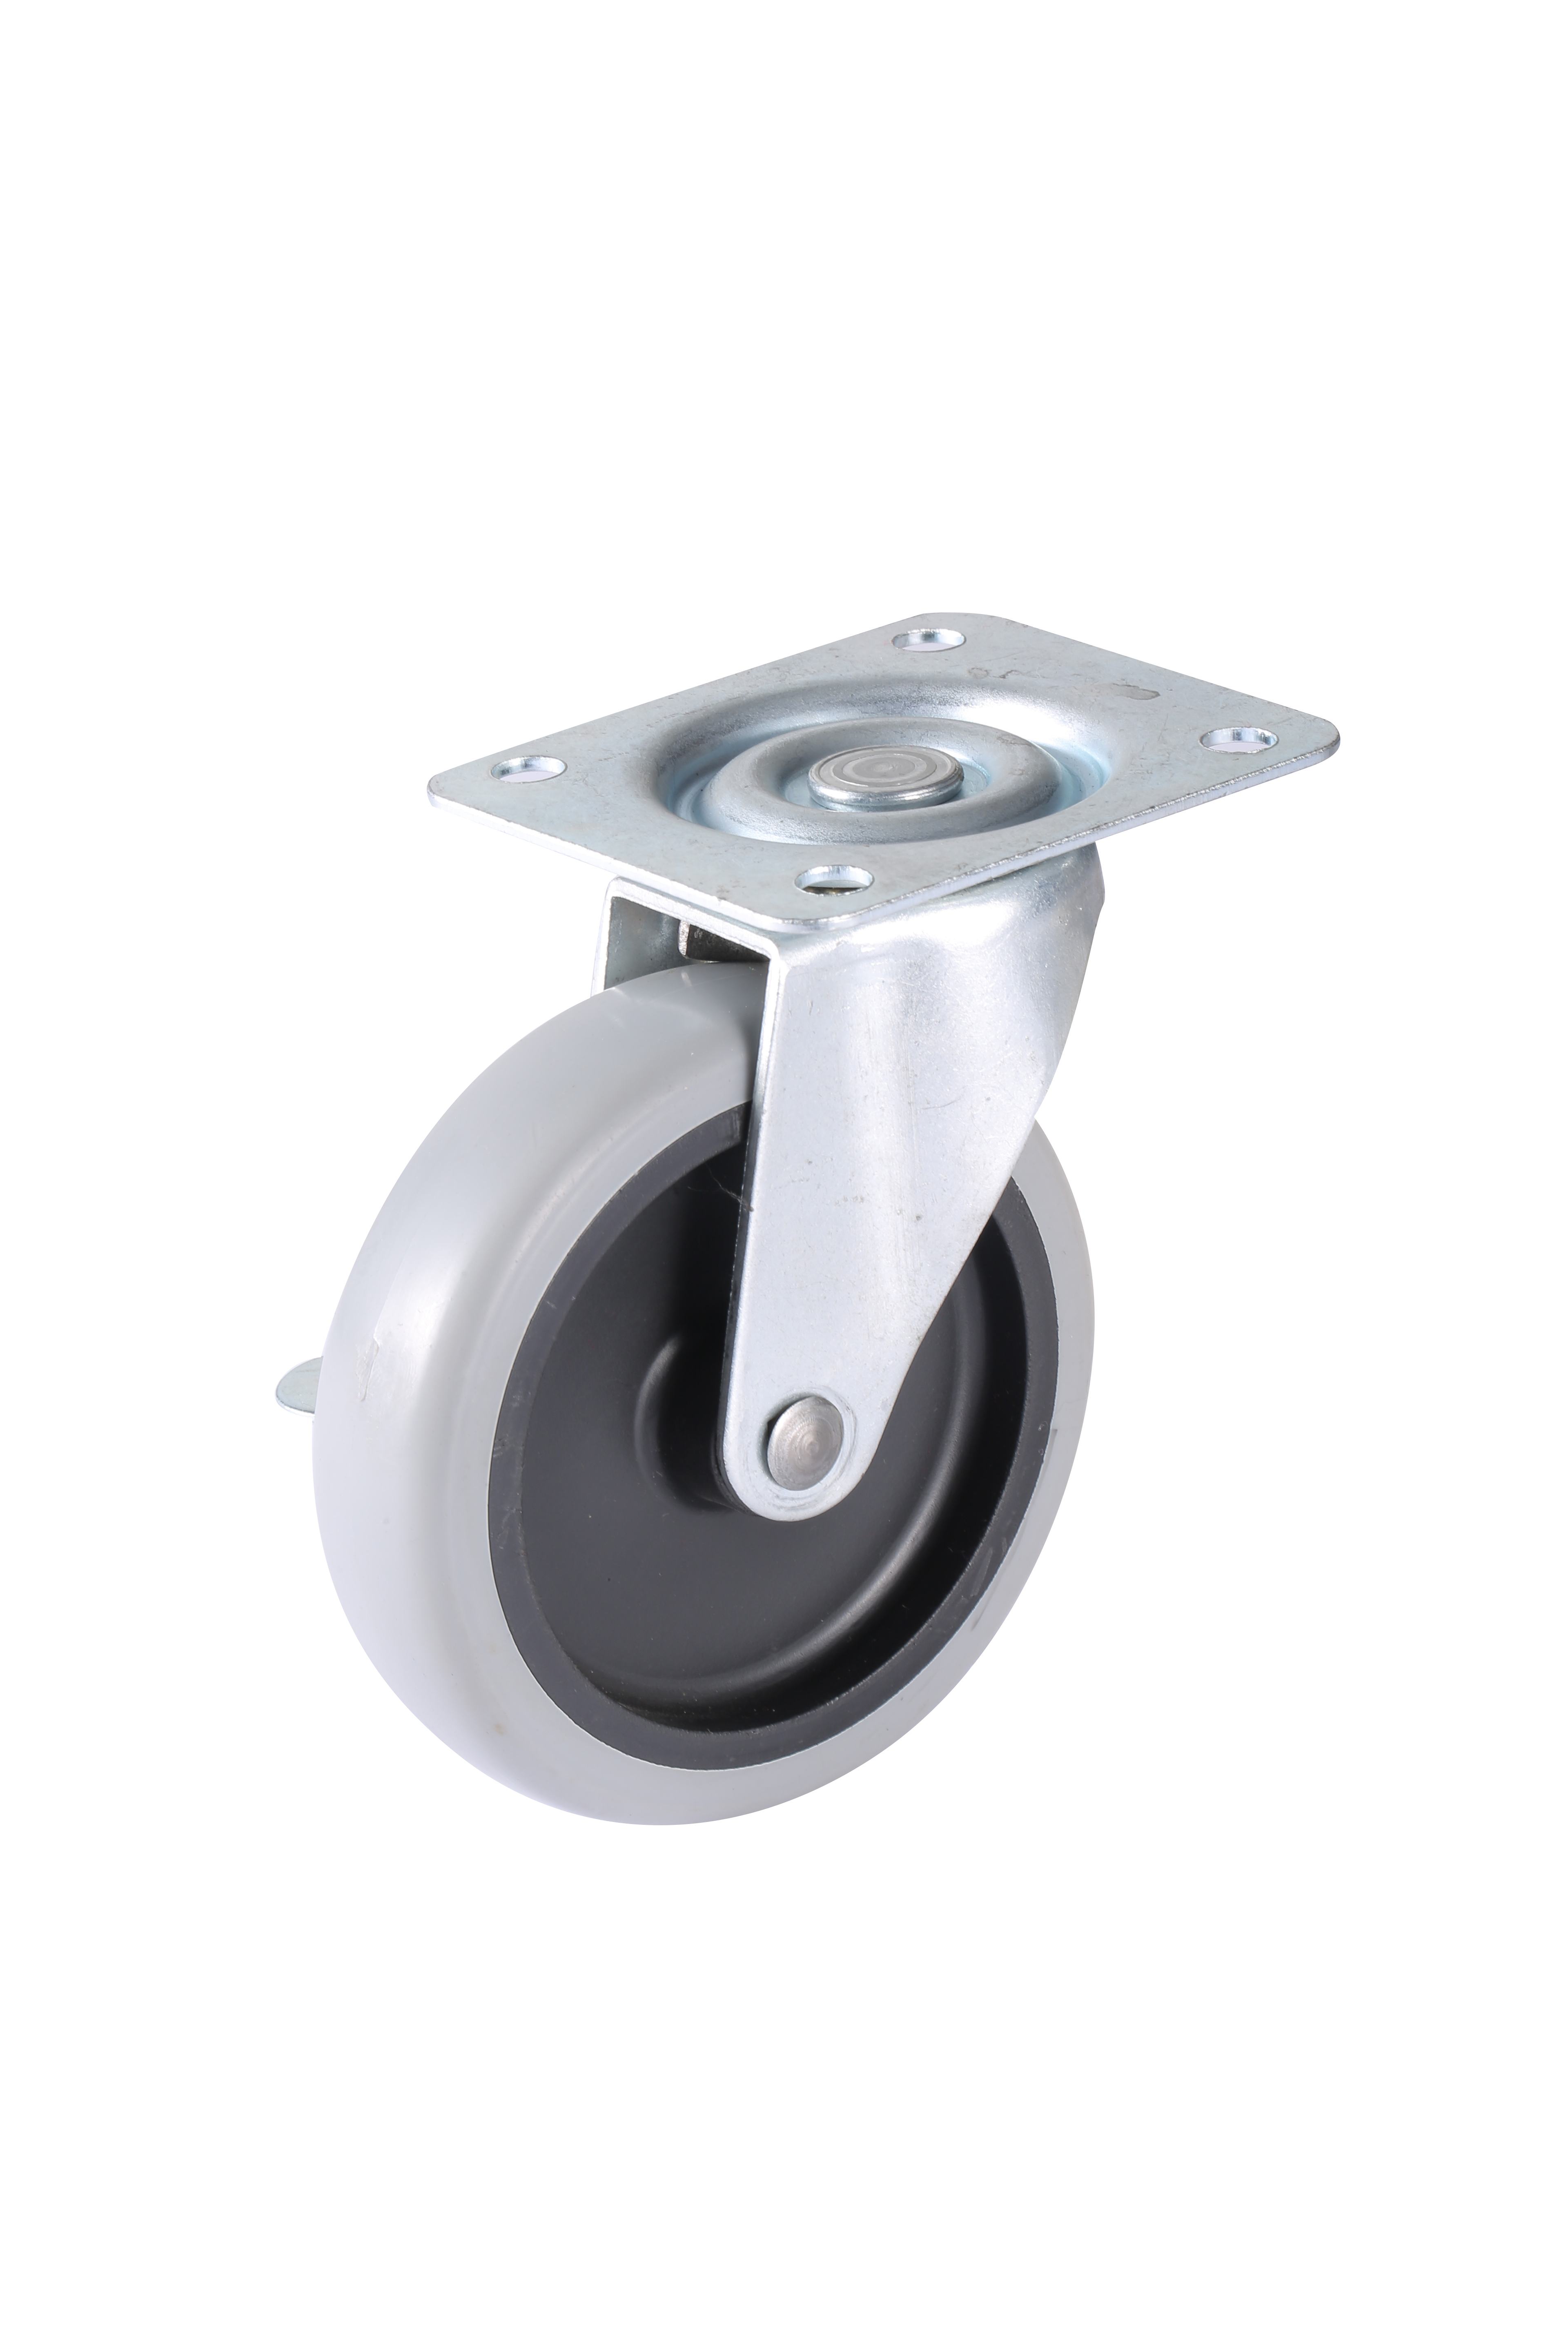 caster swivel wheel with brakes manufacturer